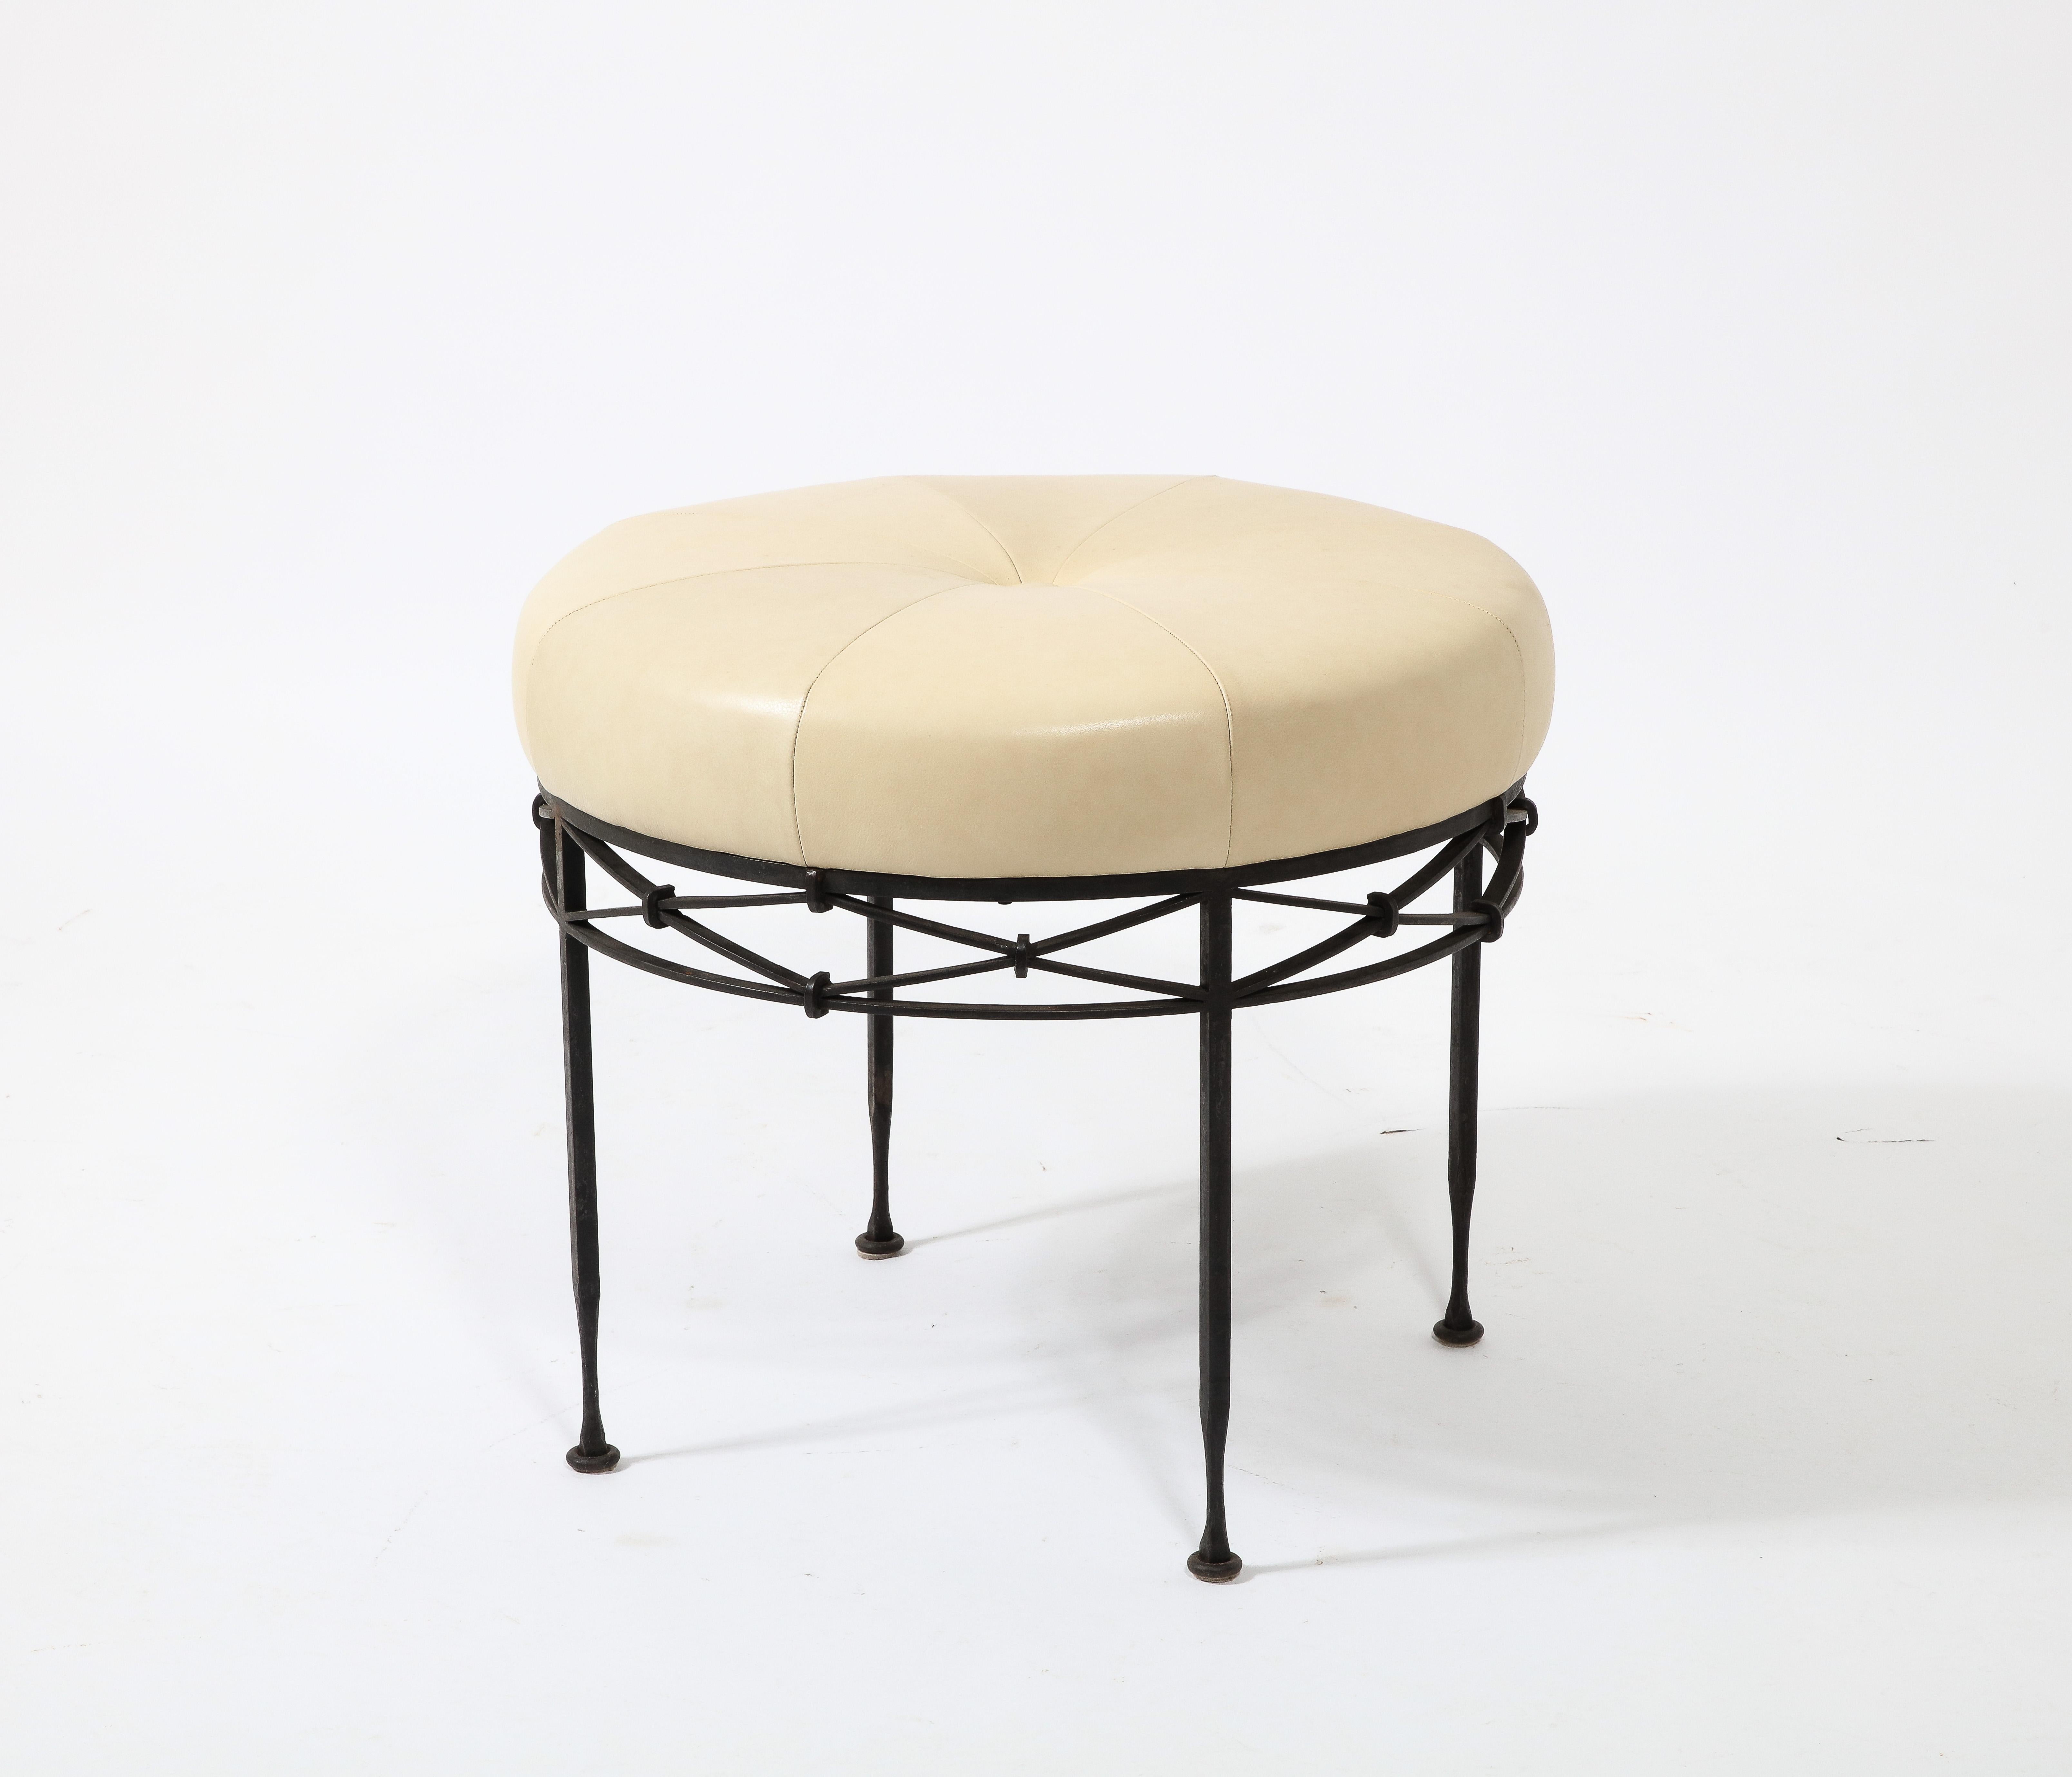 European Wrought Iron & Leather Stool, France 1950's For Sale